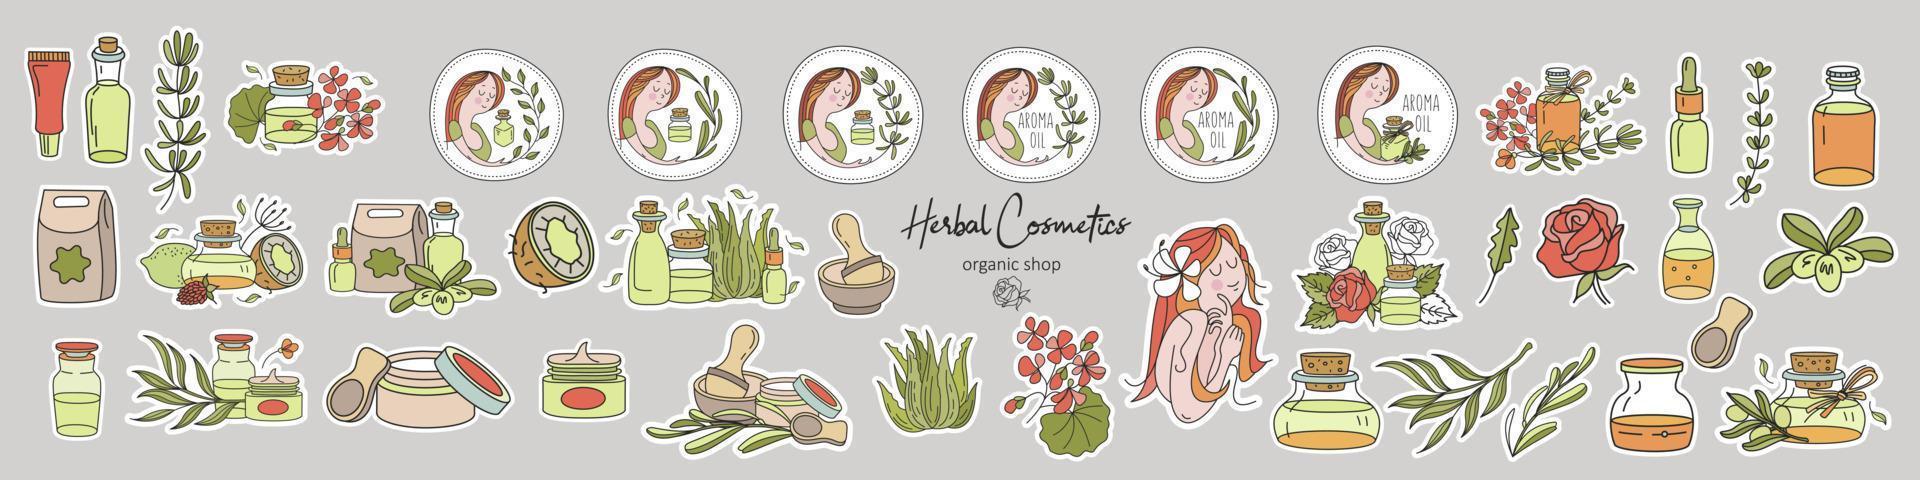 A set of stickers natural cosmetics, natural pharmacy products. vector